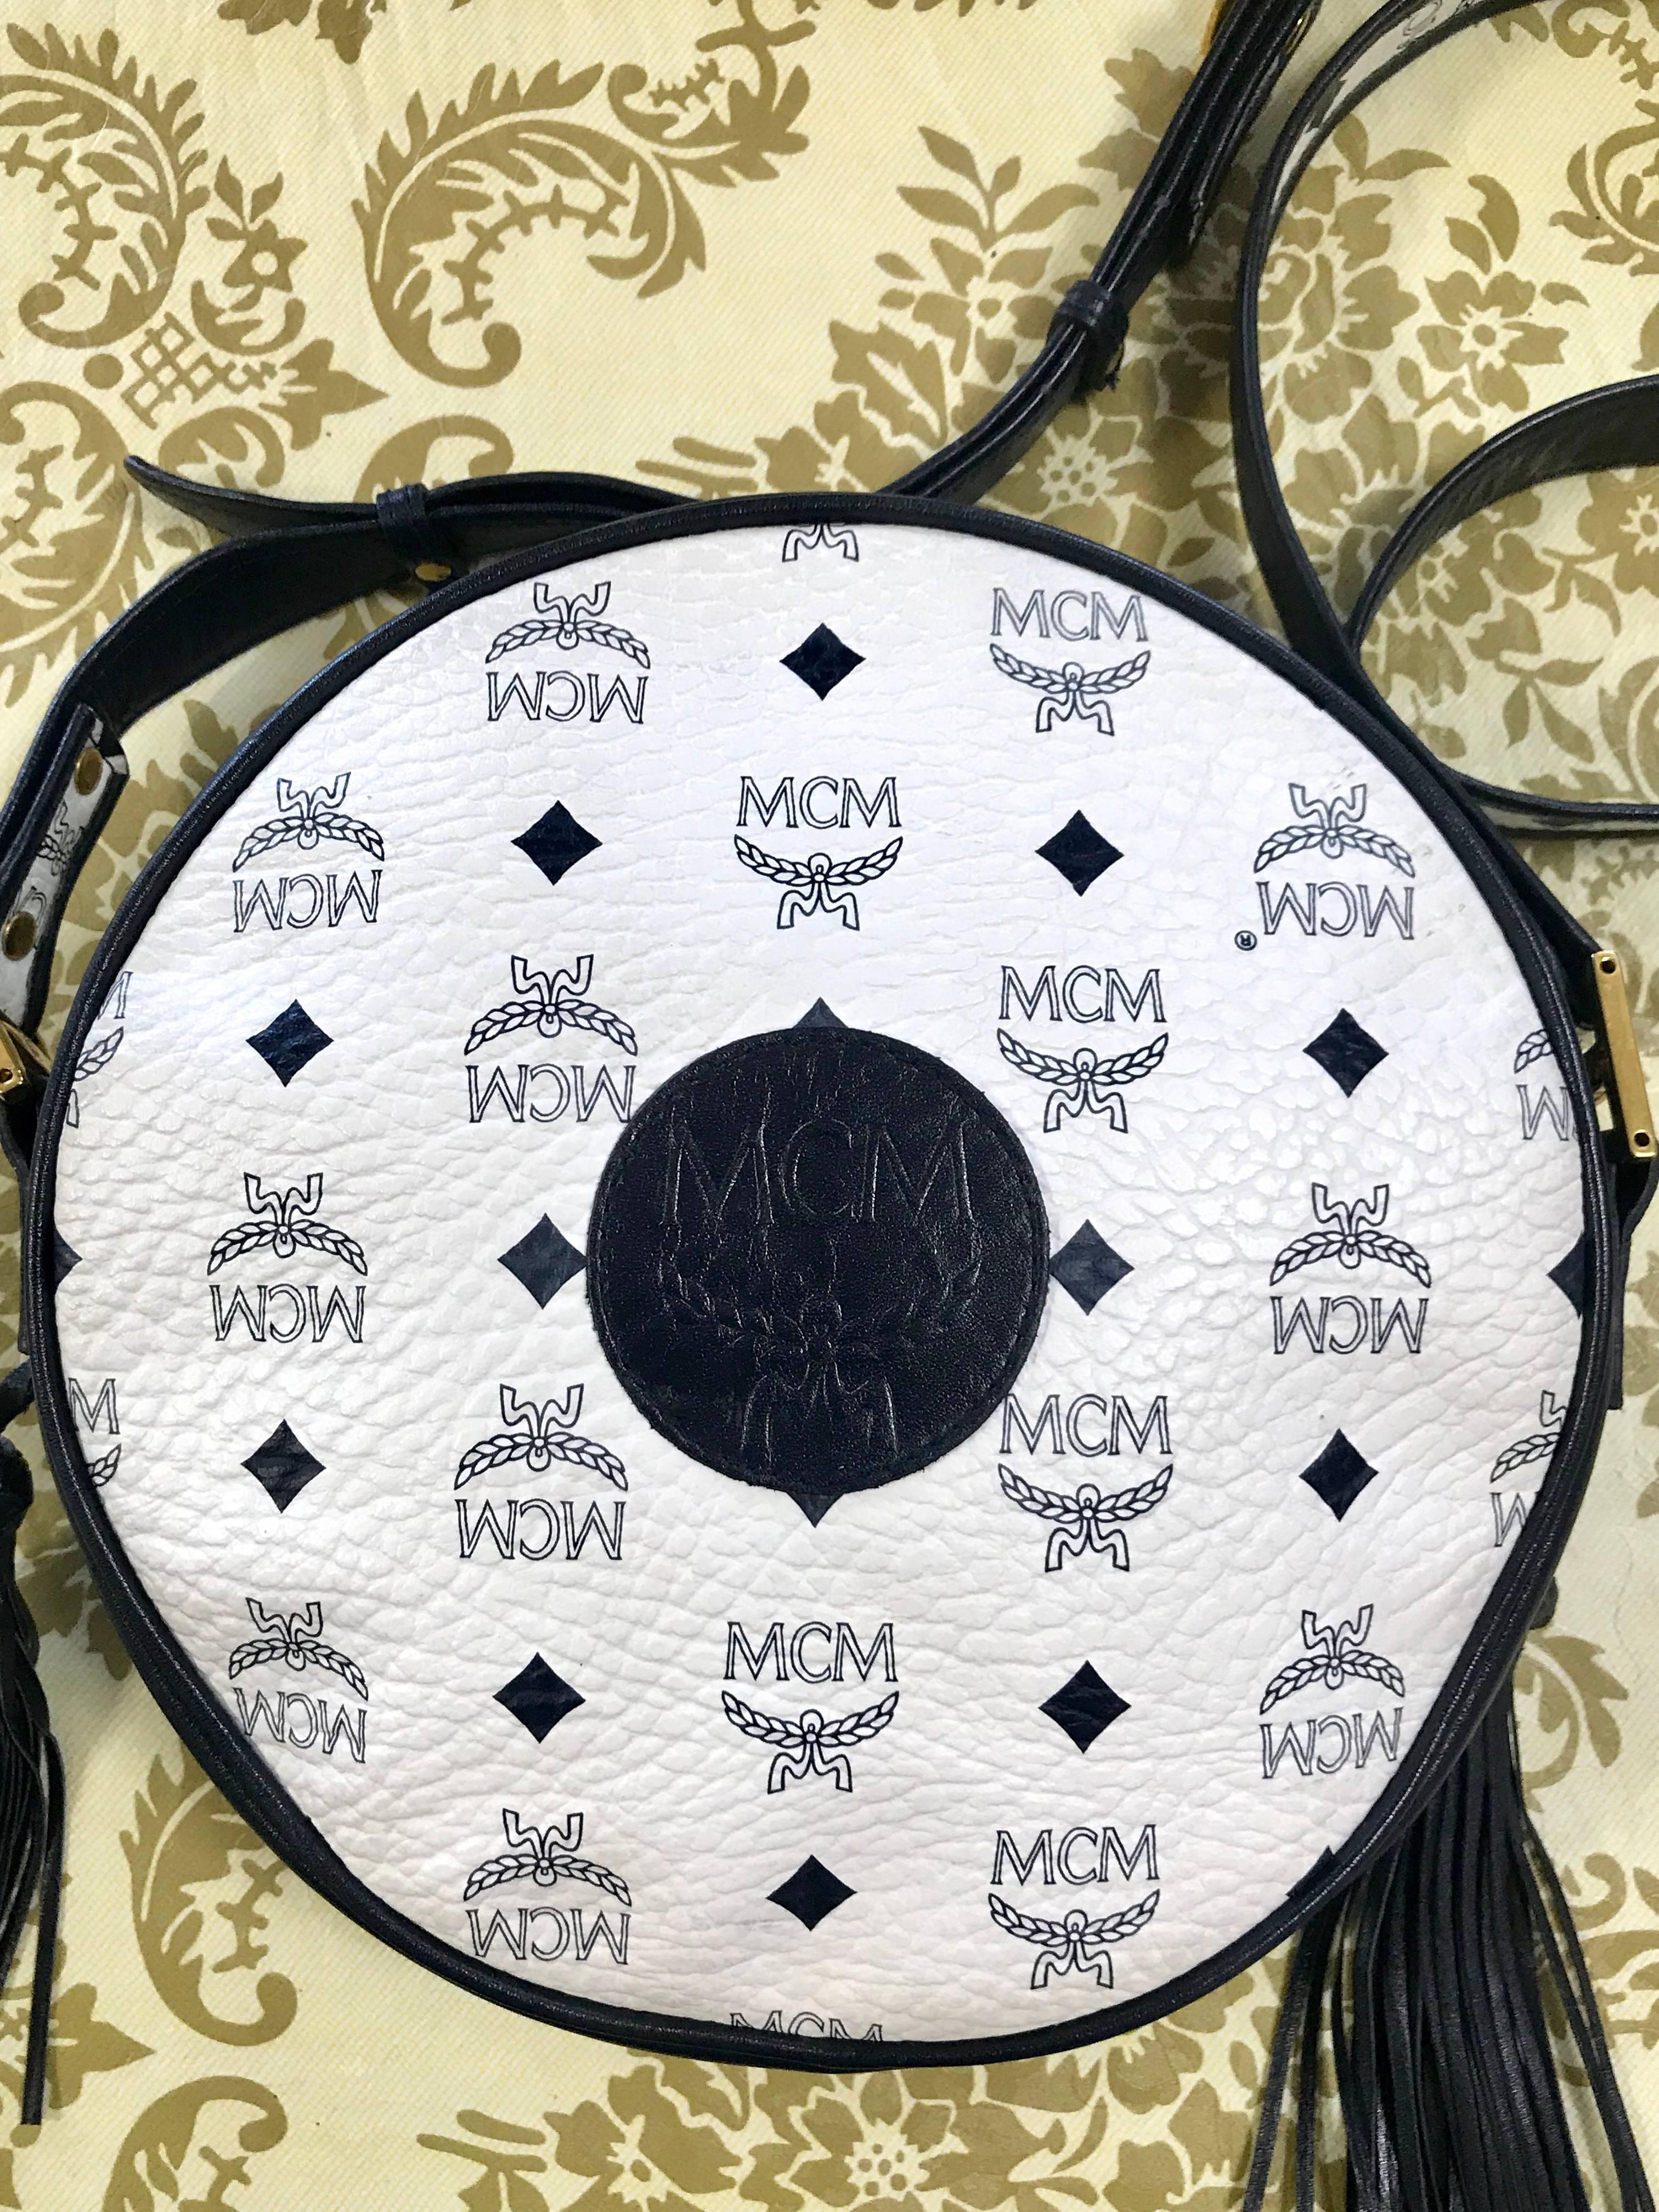 Beautiful vintage condition! 
1990s. Vintage MCM navy and white monogram round shape Suzy Wong shoulder bag with leather trimmings. Unisex purse Designed by Michael Cromer.

MCM has been back in the fashion trend again!!
Now it's considered to be